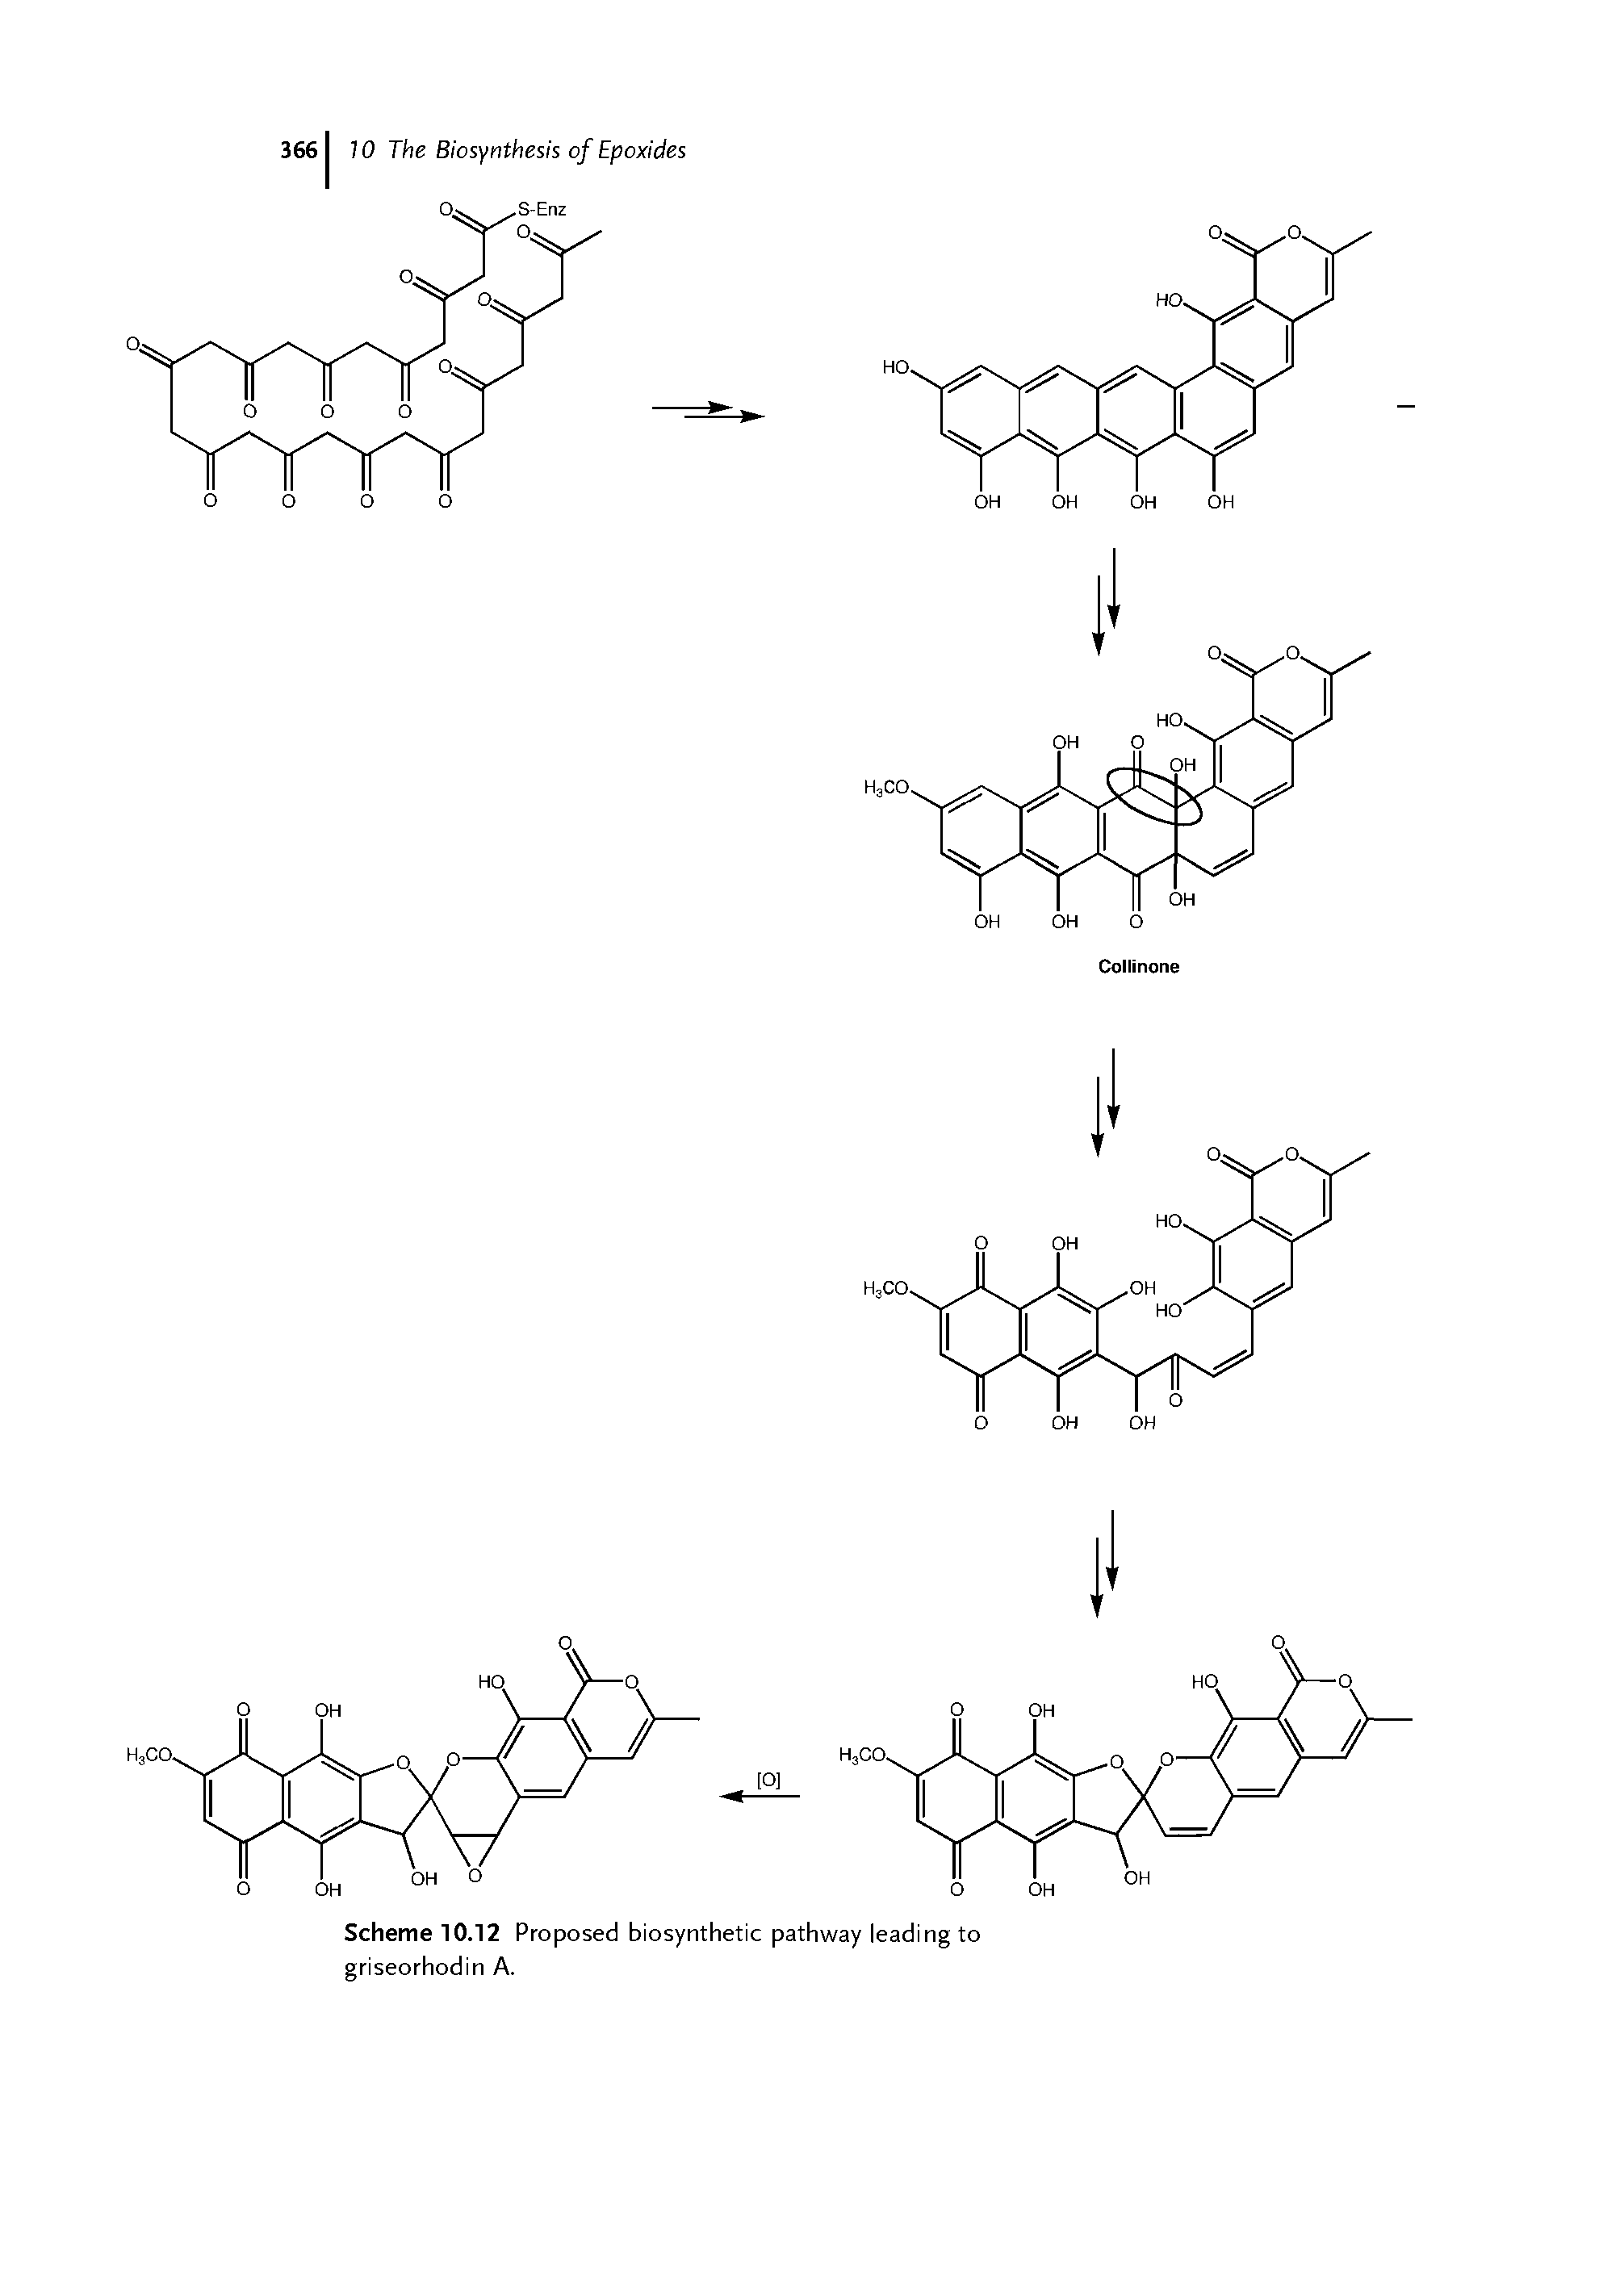 Scheme 10.12 Proposed biosynthetic pathway leading to griseorhodin A.